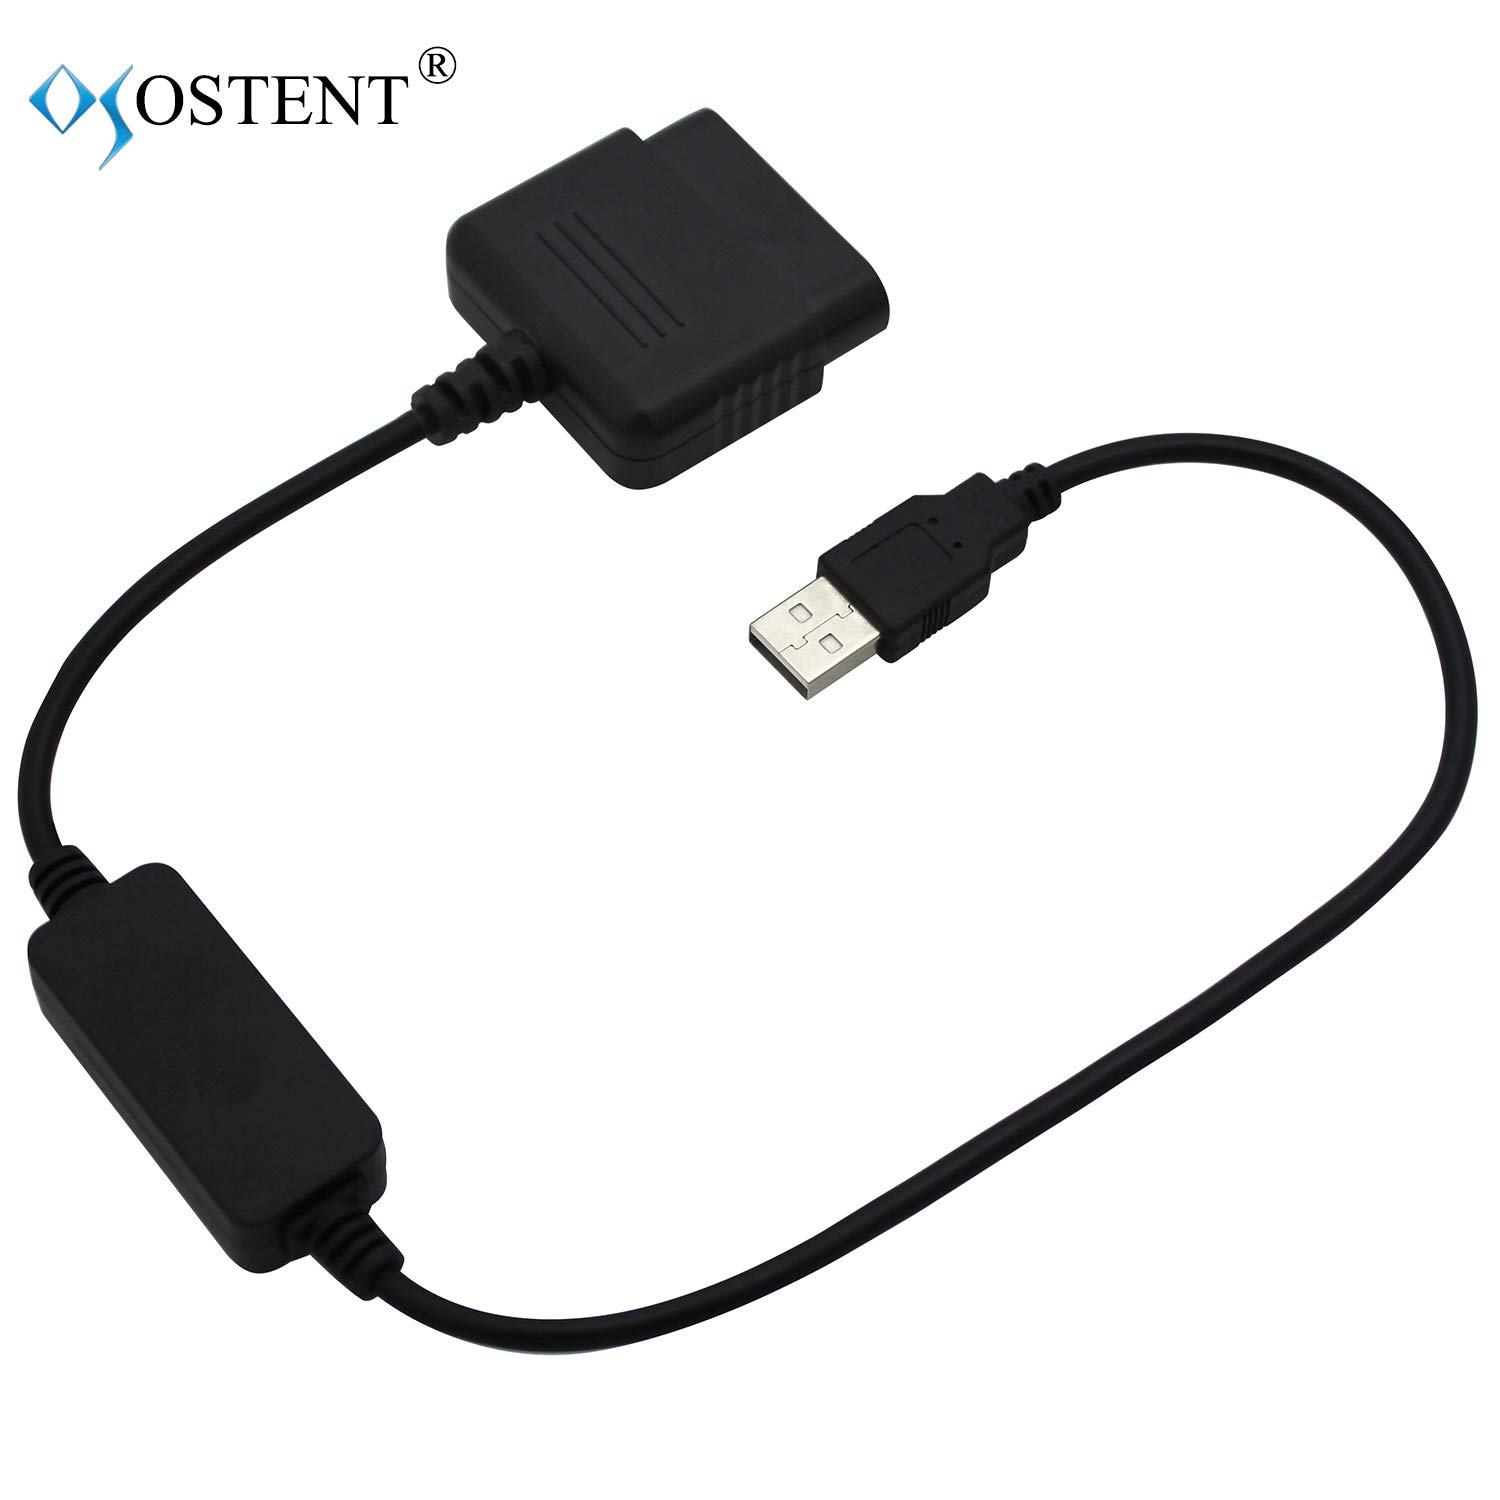 OSTENT PS2 to PS3 USB Controller Converter Cable Adapter for Sony PS3 Console Game